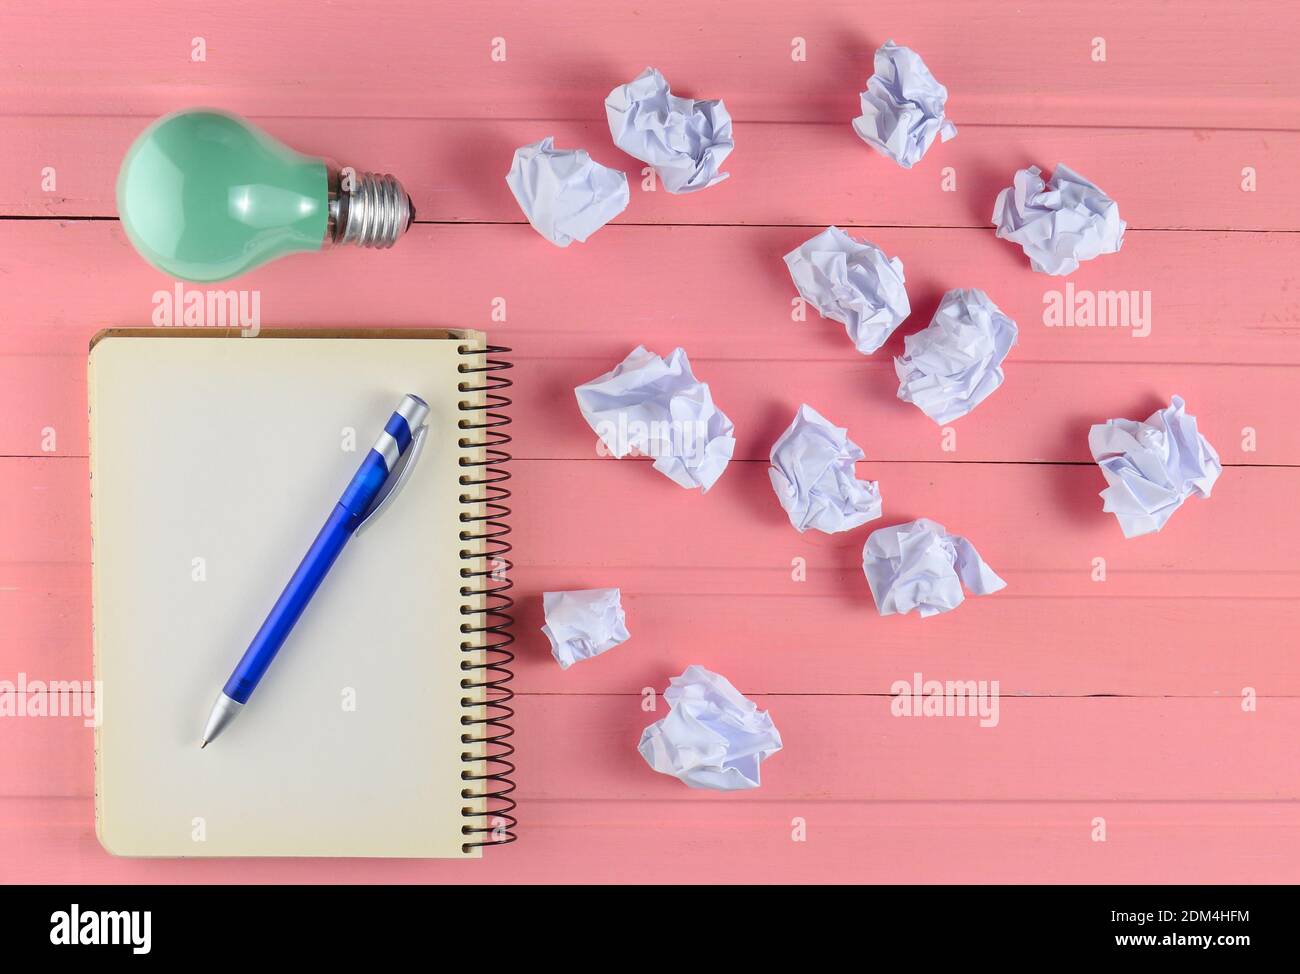 Notepad with a pen, incandescent bulb and crumpled white paper balls on a pink wooden table. Ideological concept, top view Stockfoto